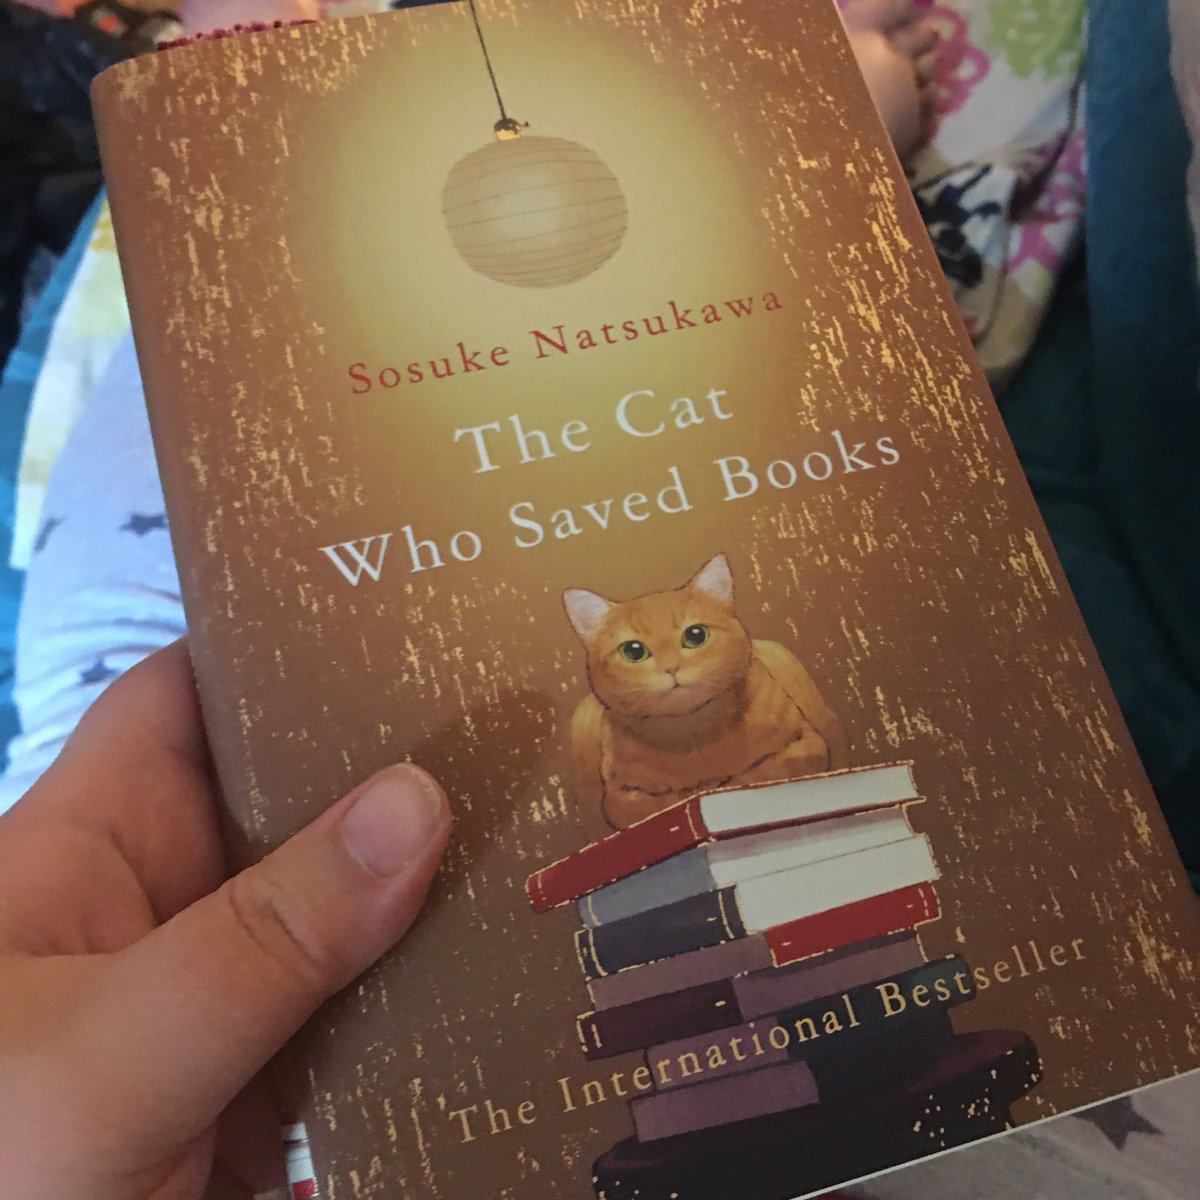 Enjoying my new book!

It’s been a long, hard week & putting my feet up & immersing myself in another world is a great way to wind down for the weekend. 

#ReadingTwitter #Books #BooksAboutBooks #TheCatWhoSavedBooks